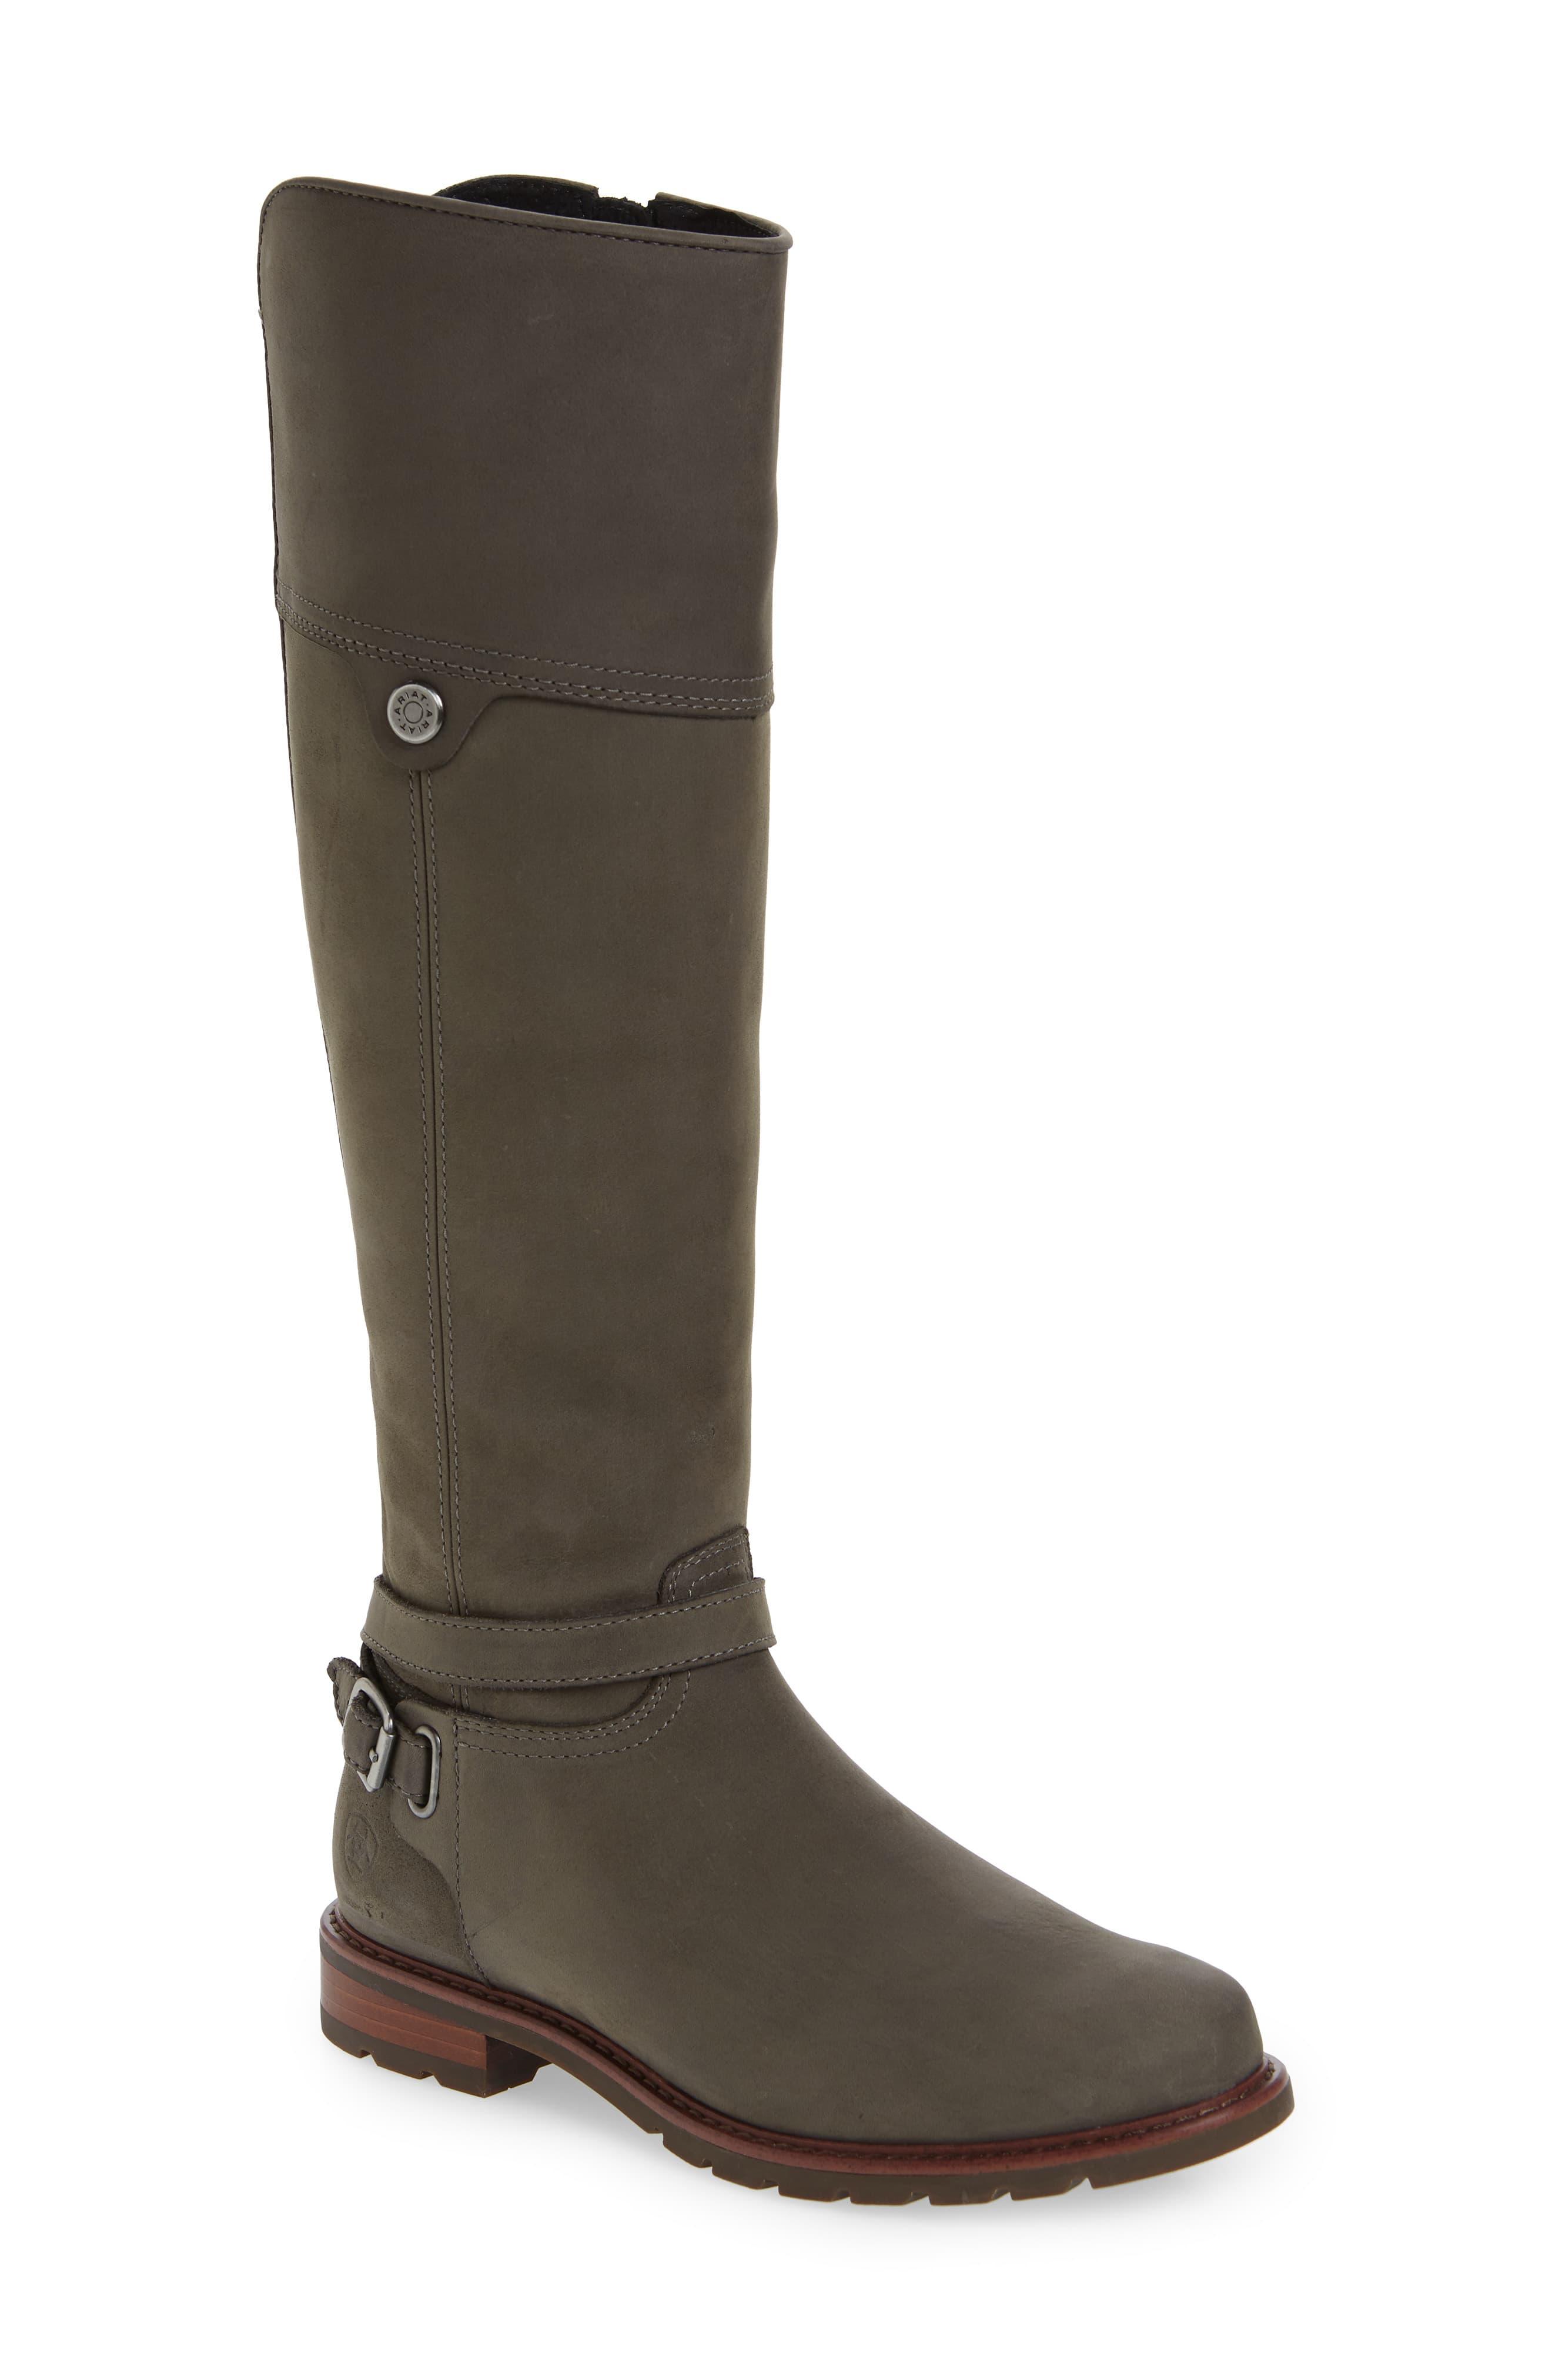 Ariat Rubber Carden Waterproof Knee High Boot in Charcoal (Gray) - Lyst